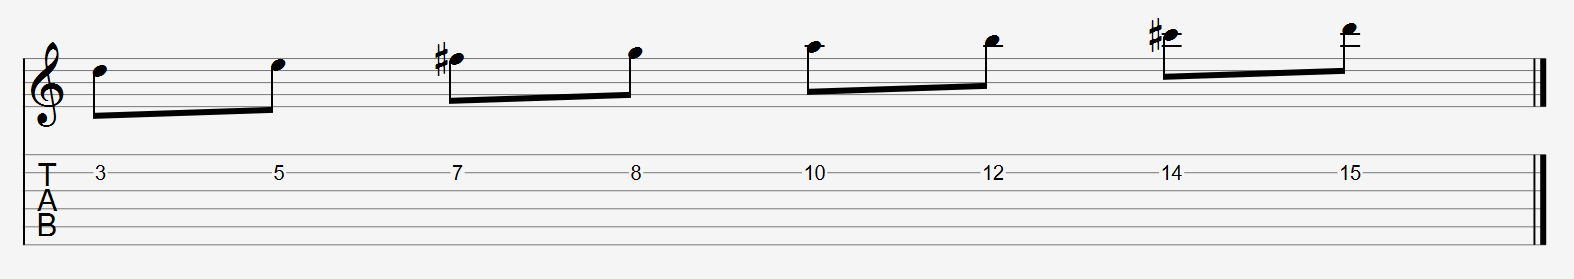 notes in the D major scale